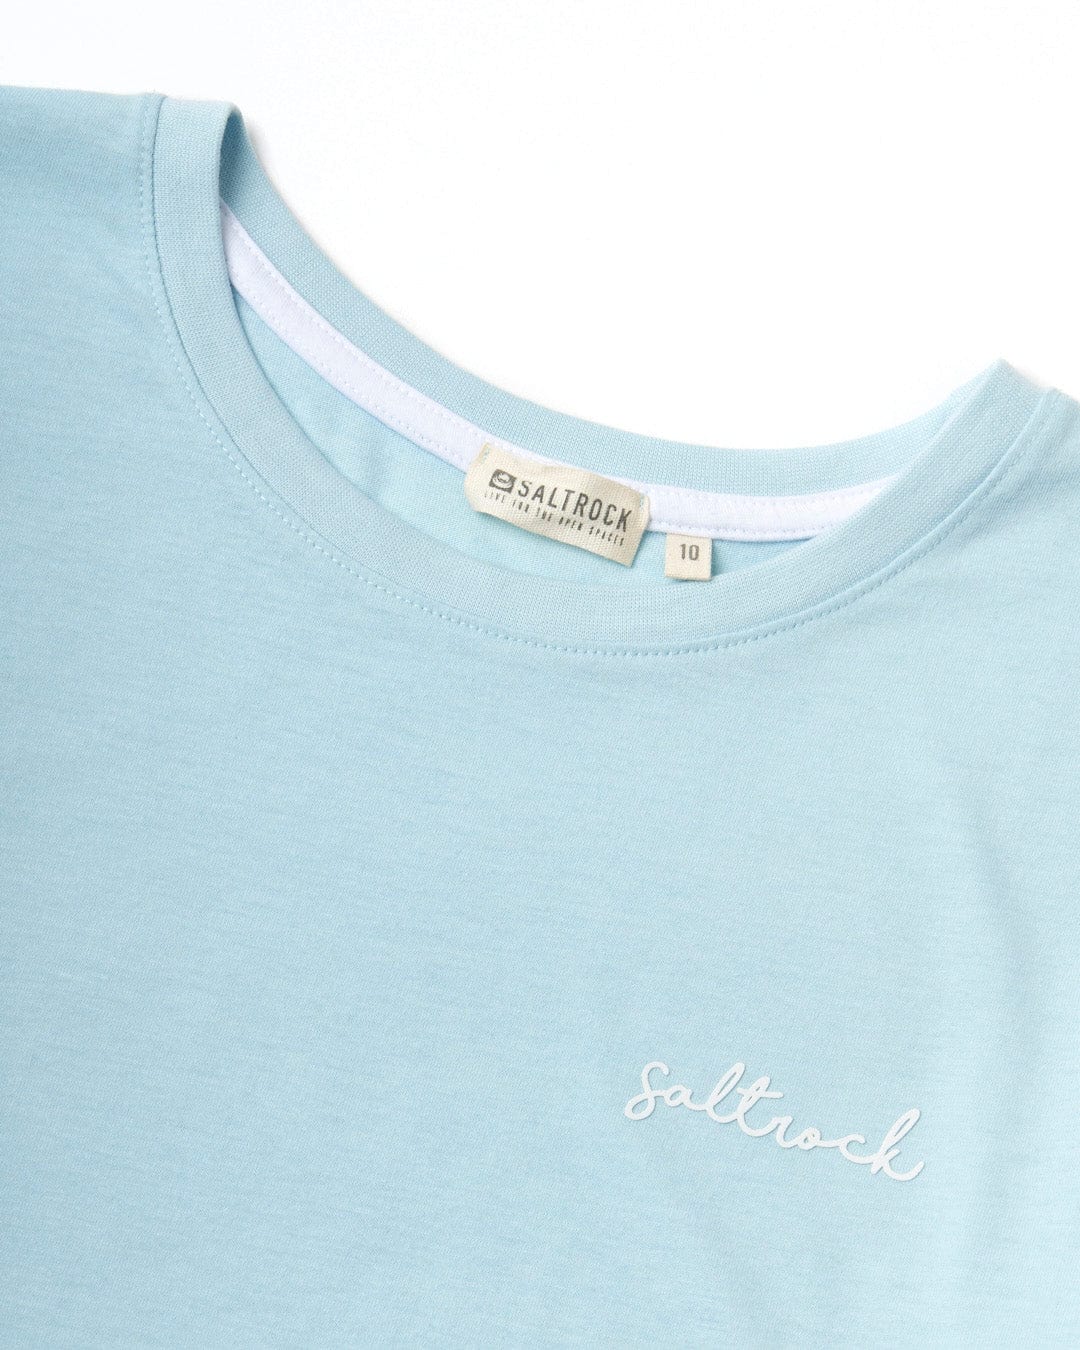 A Saltrock Velator - Womens Short Sleeve T-Shirt - Light Blue with the word 'salty' embroidered on it.